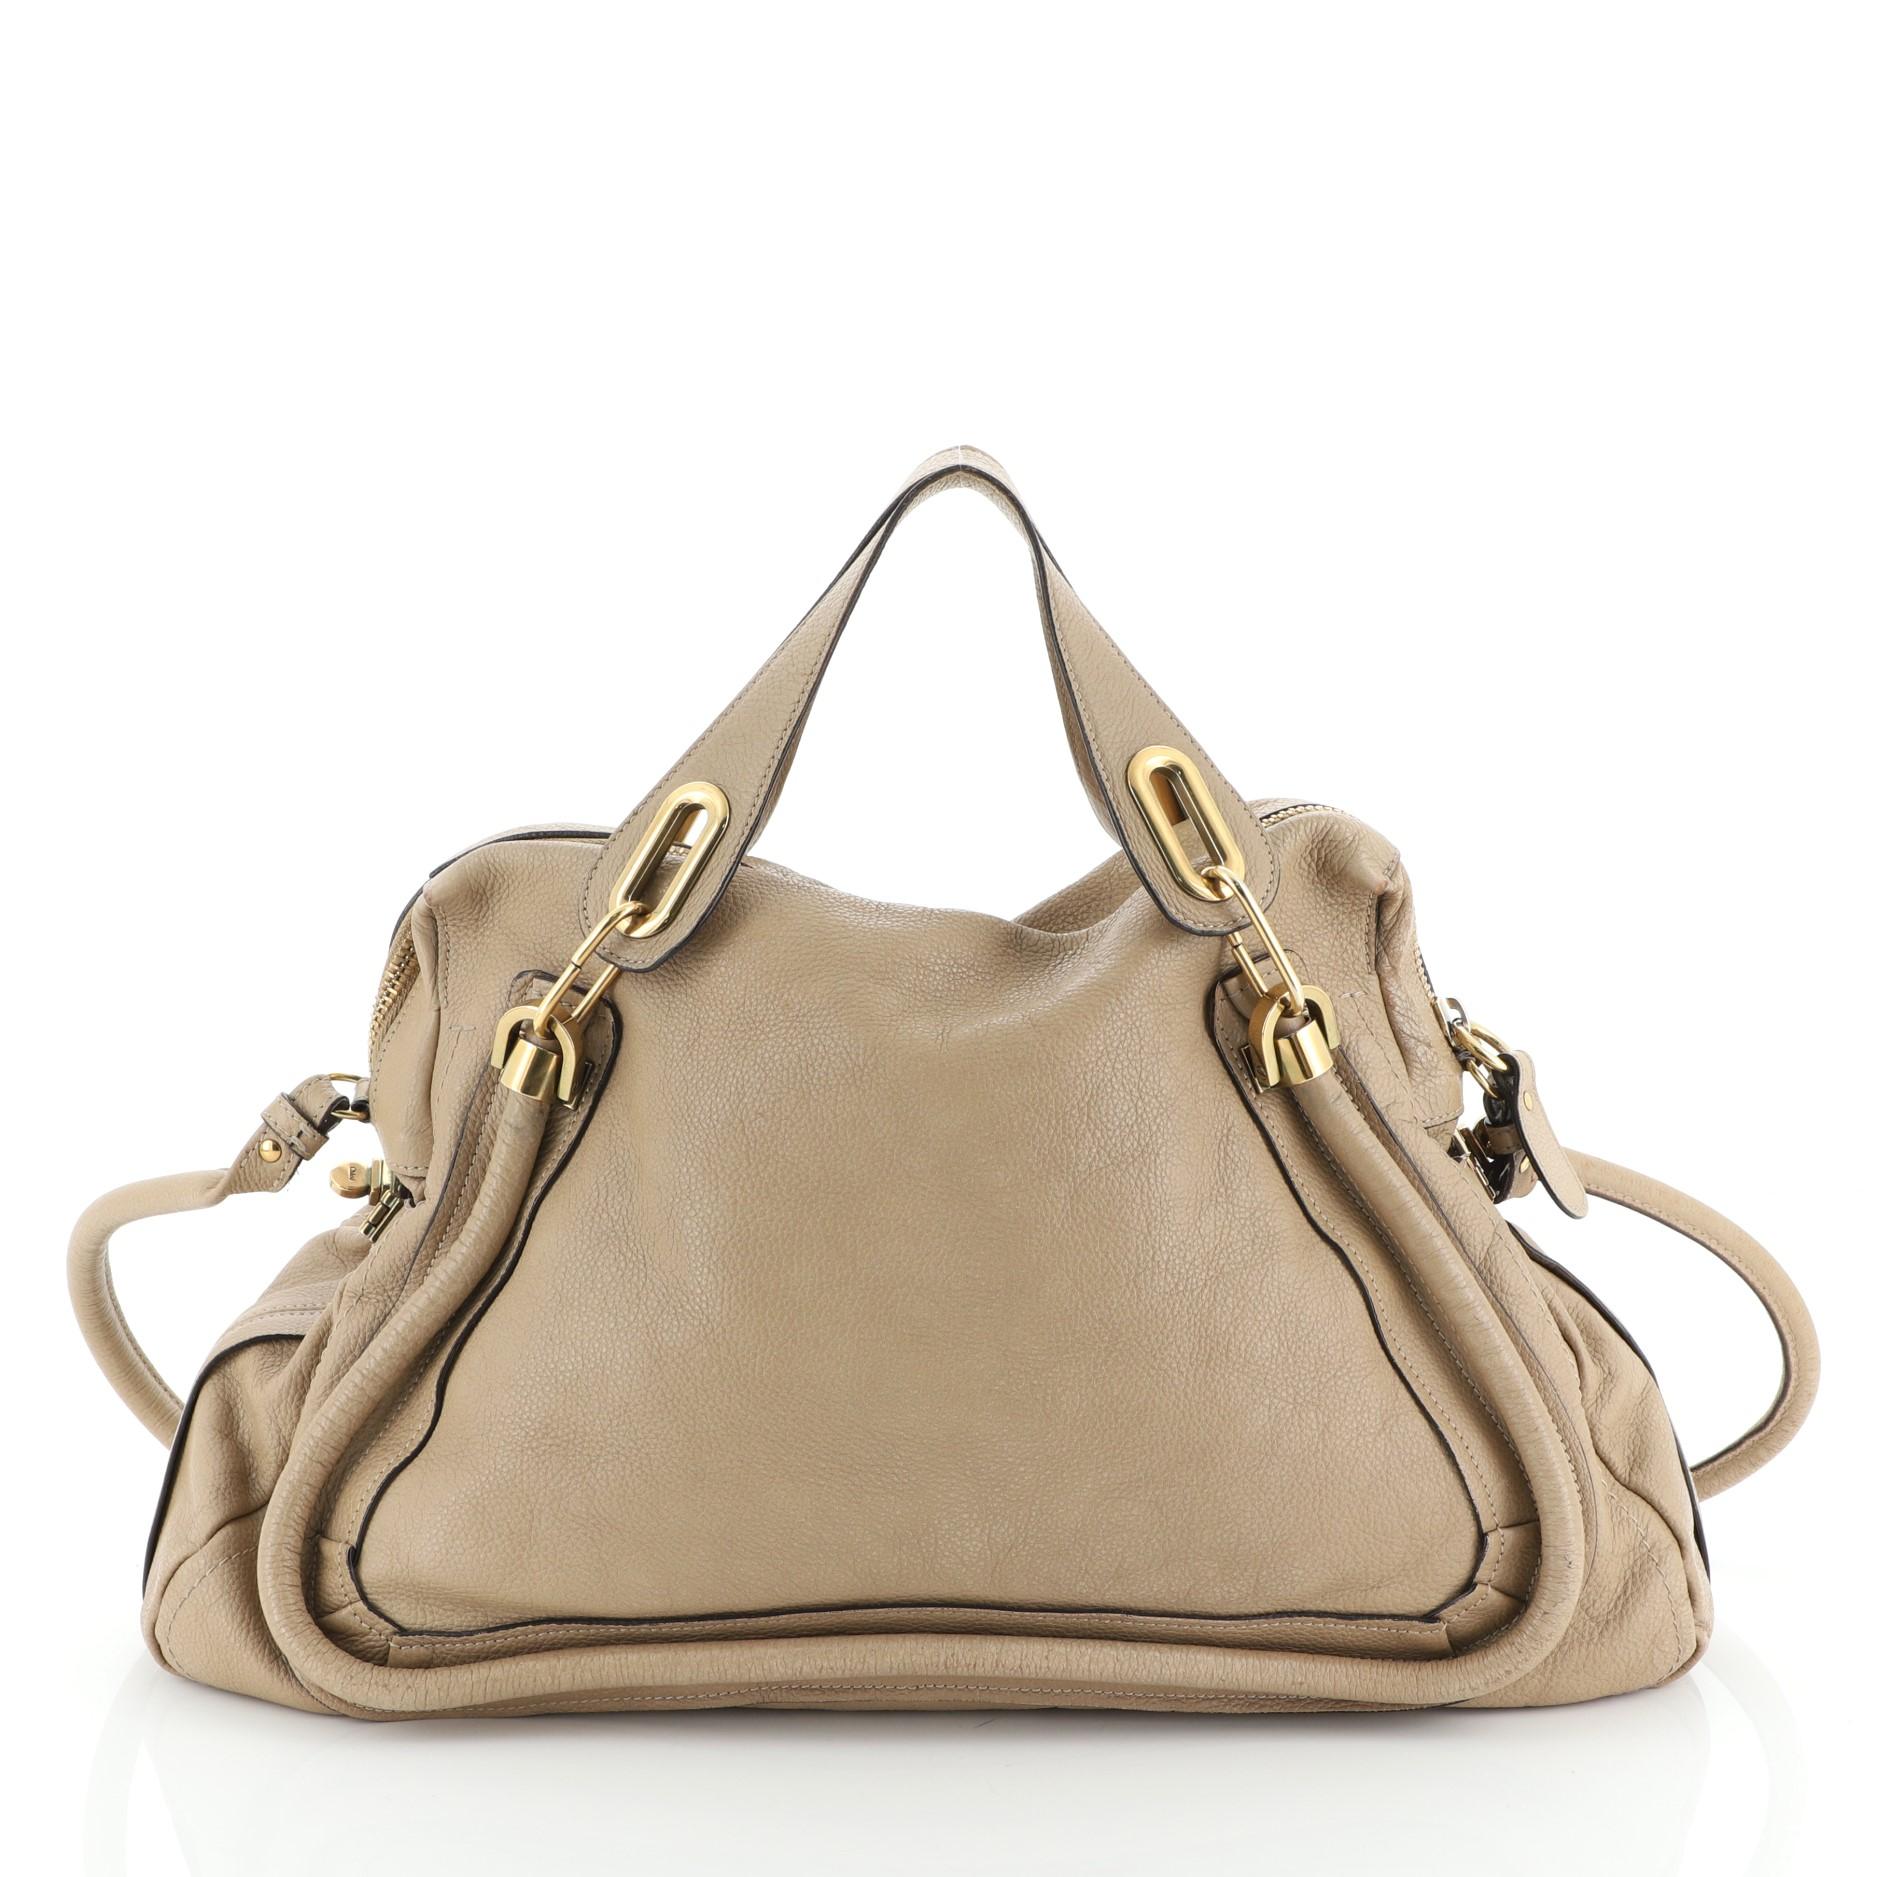 Brown Chloe Paraty Top Handle Bag Leather Large